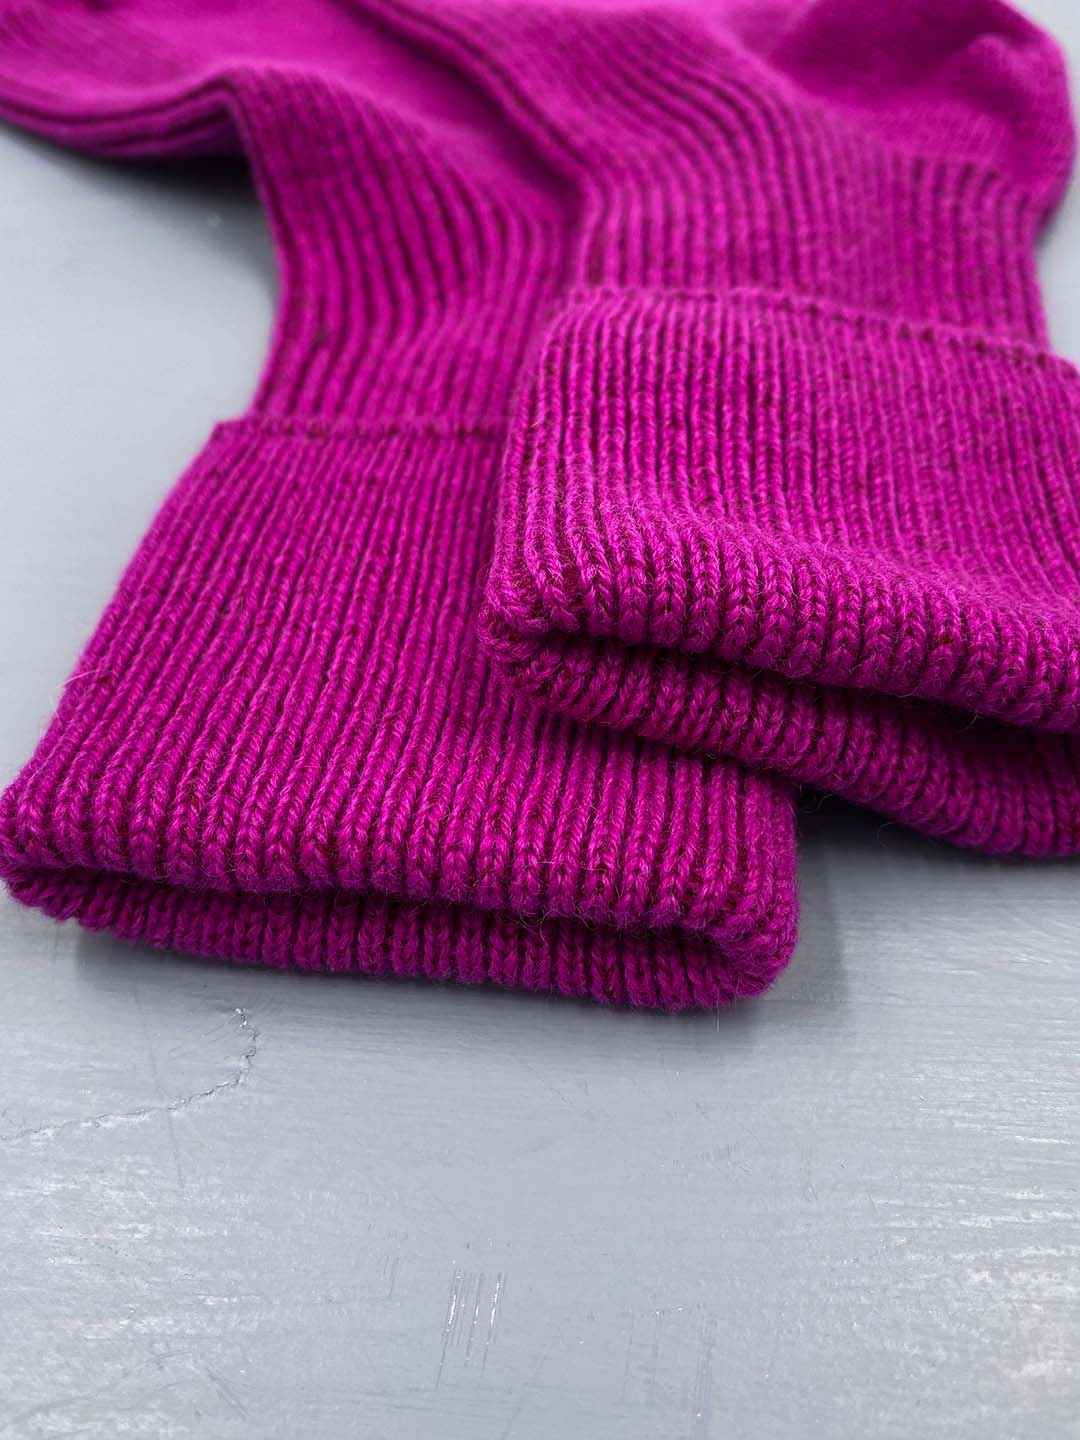 Cashmere bed socks in a vibrant fuchsia pink shade designed and made in Scotland